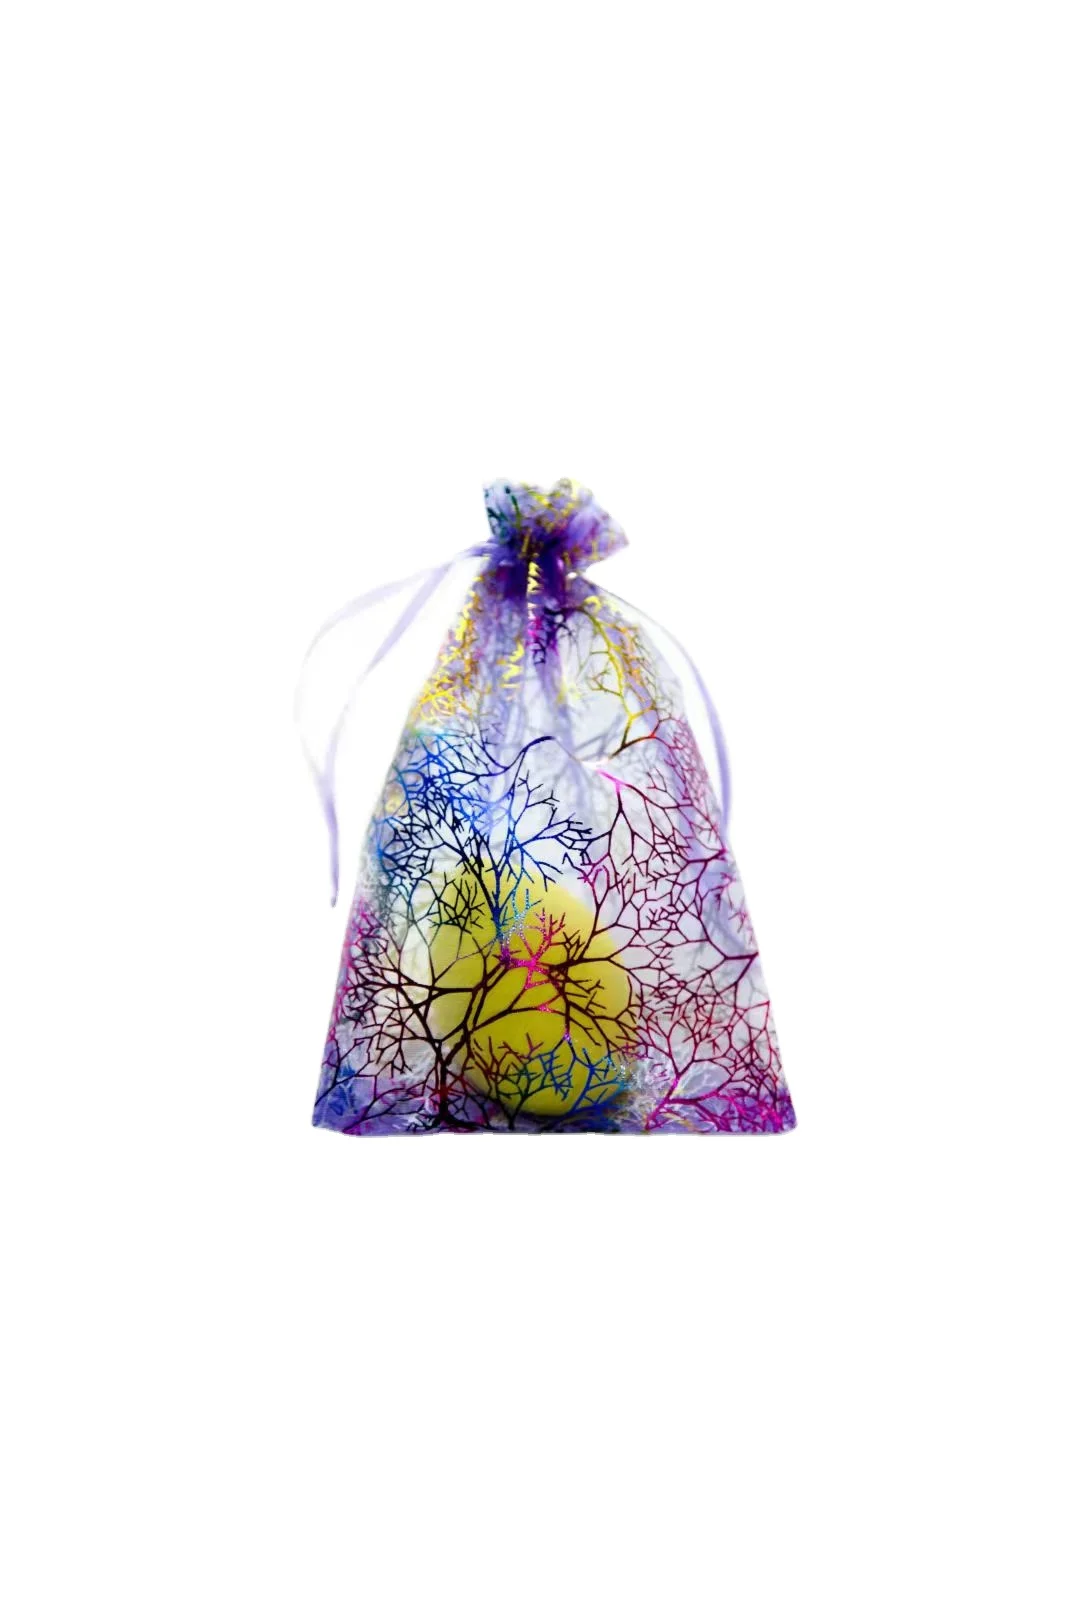 Coral 7 colorful  wholesale custom 13*18 cm rope jewelry gift bag